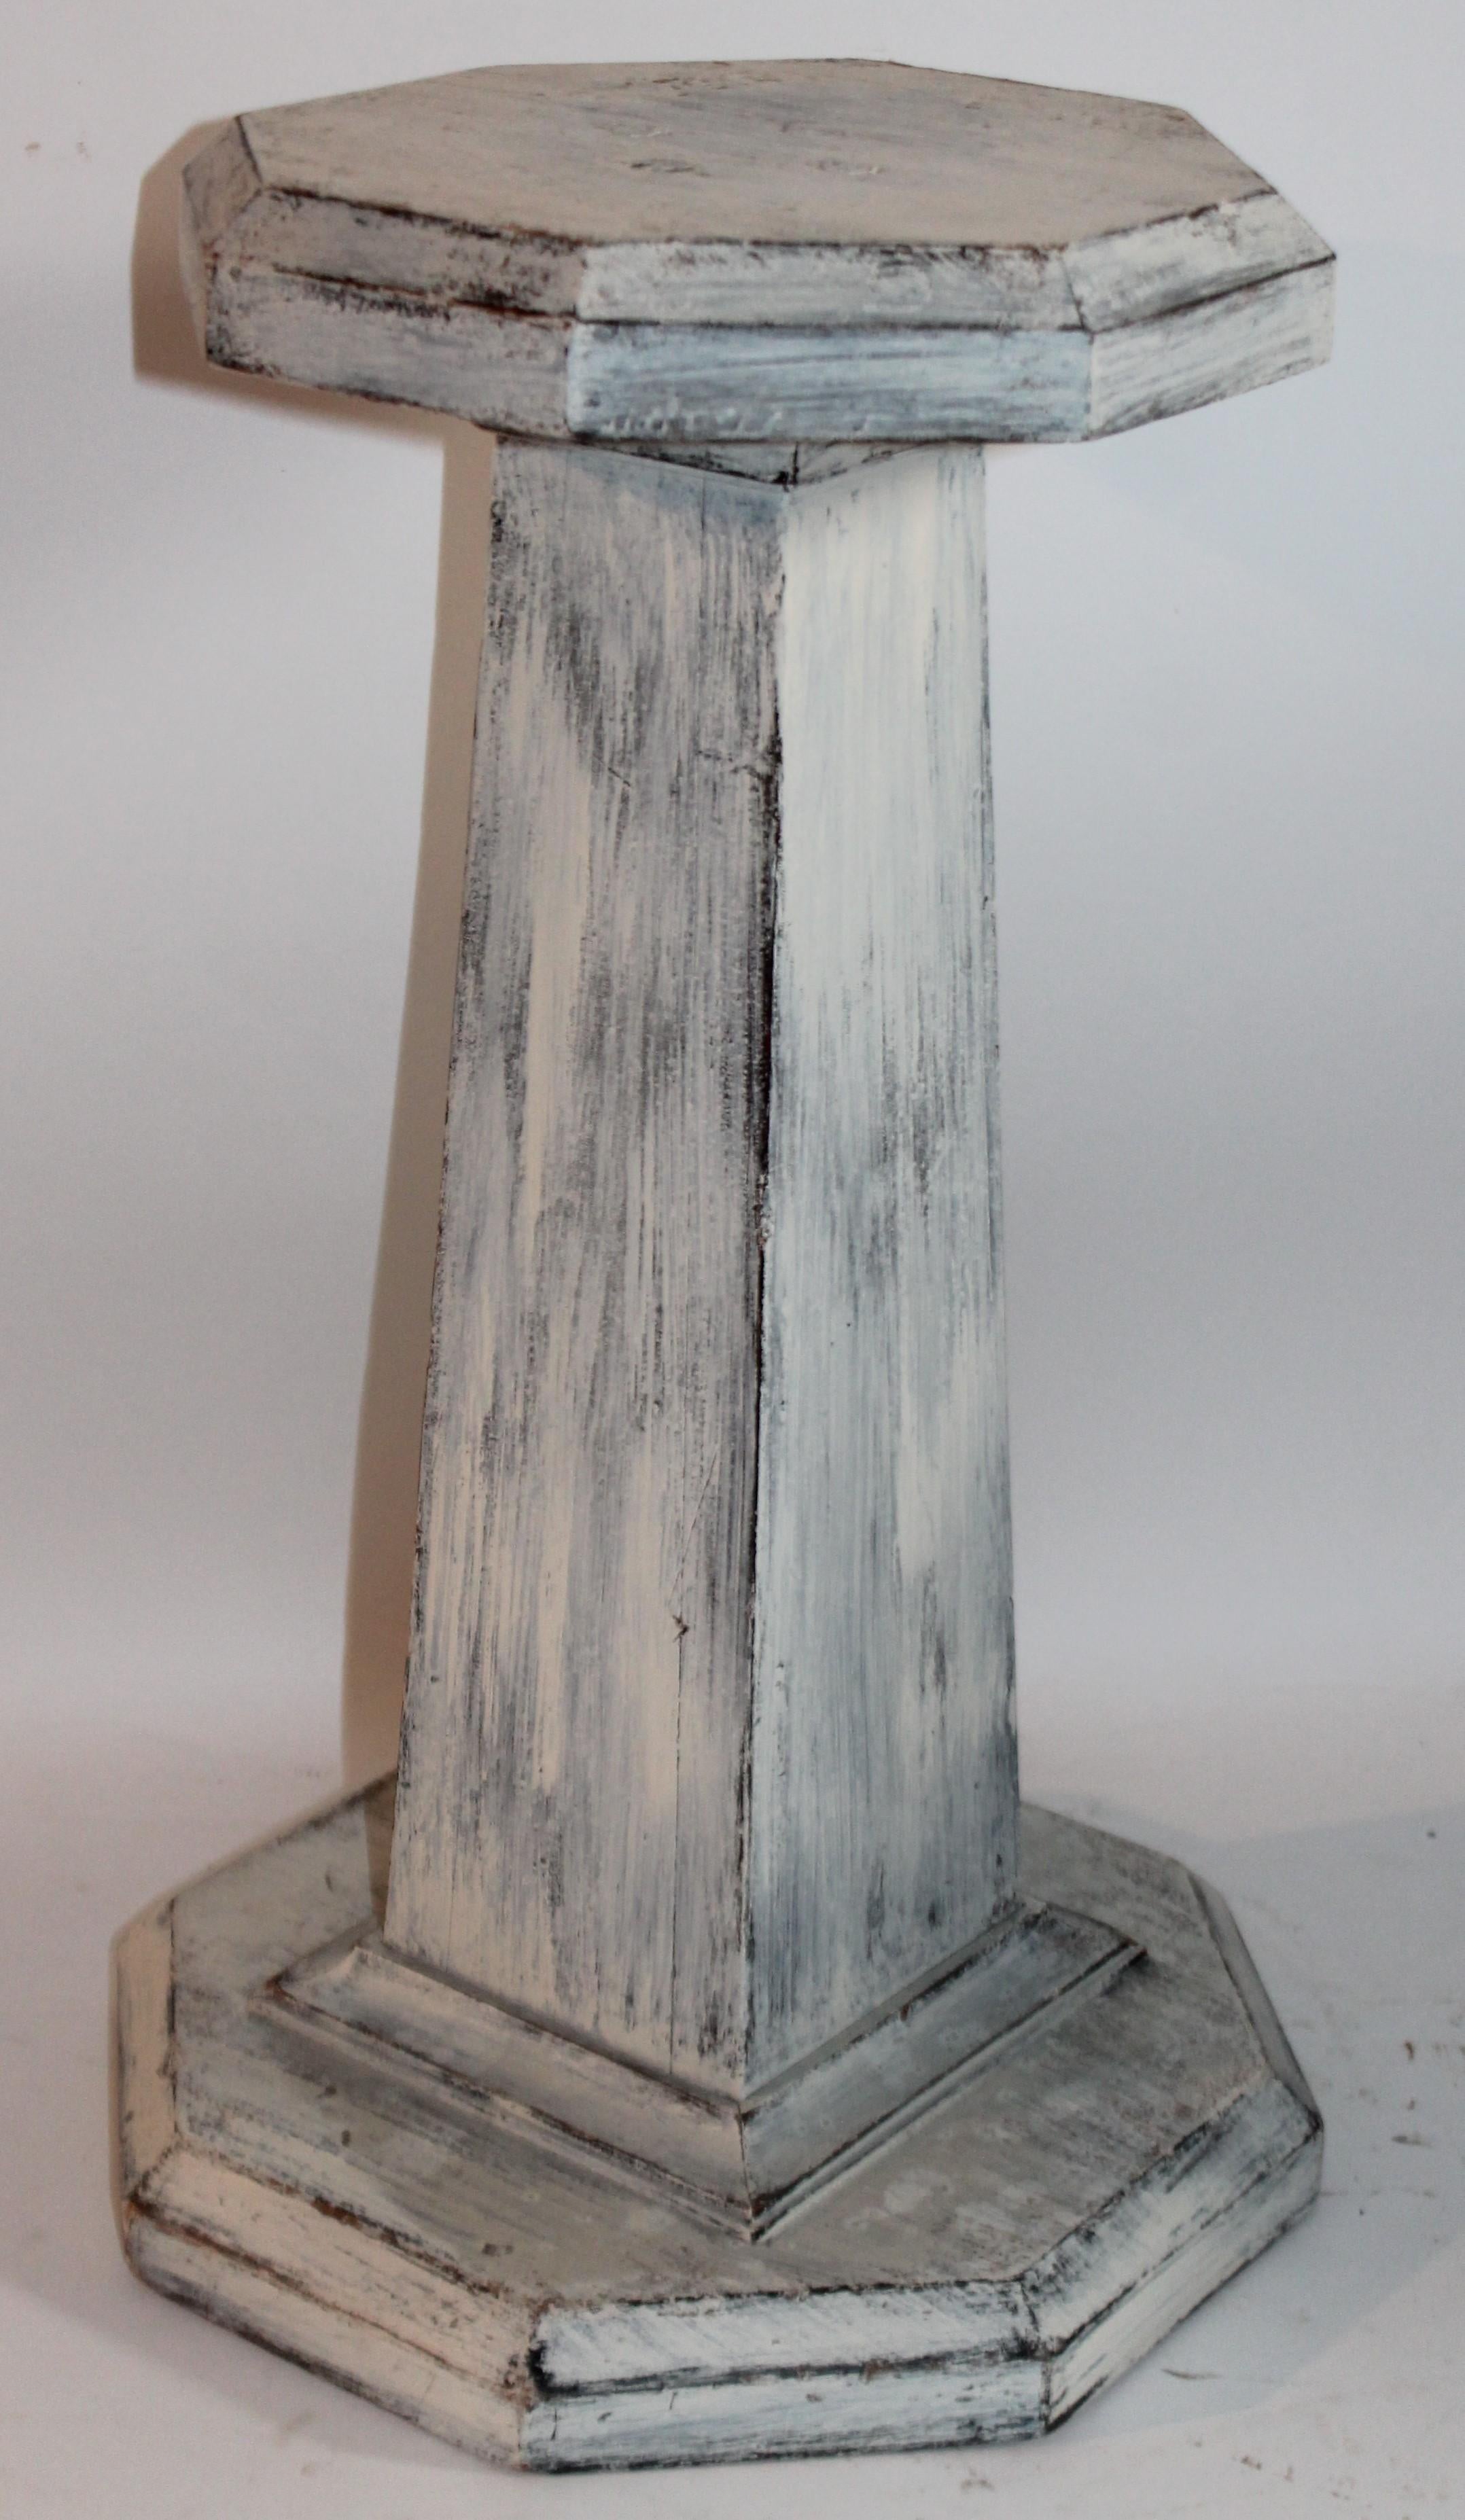 This handmade 19th century pine pedestal in original white washed painted surface is in fine condition. Its very sturdy and would be great for a Folk Art object.